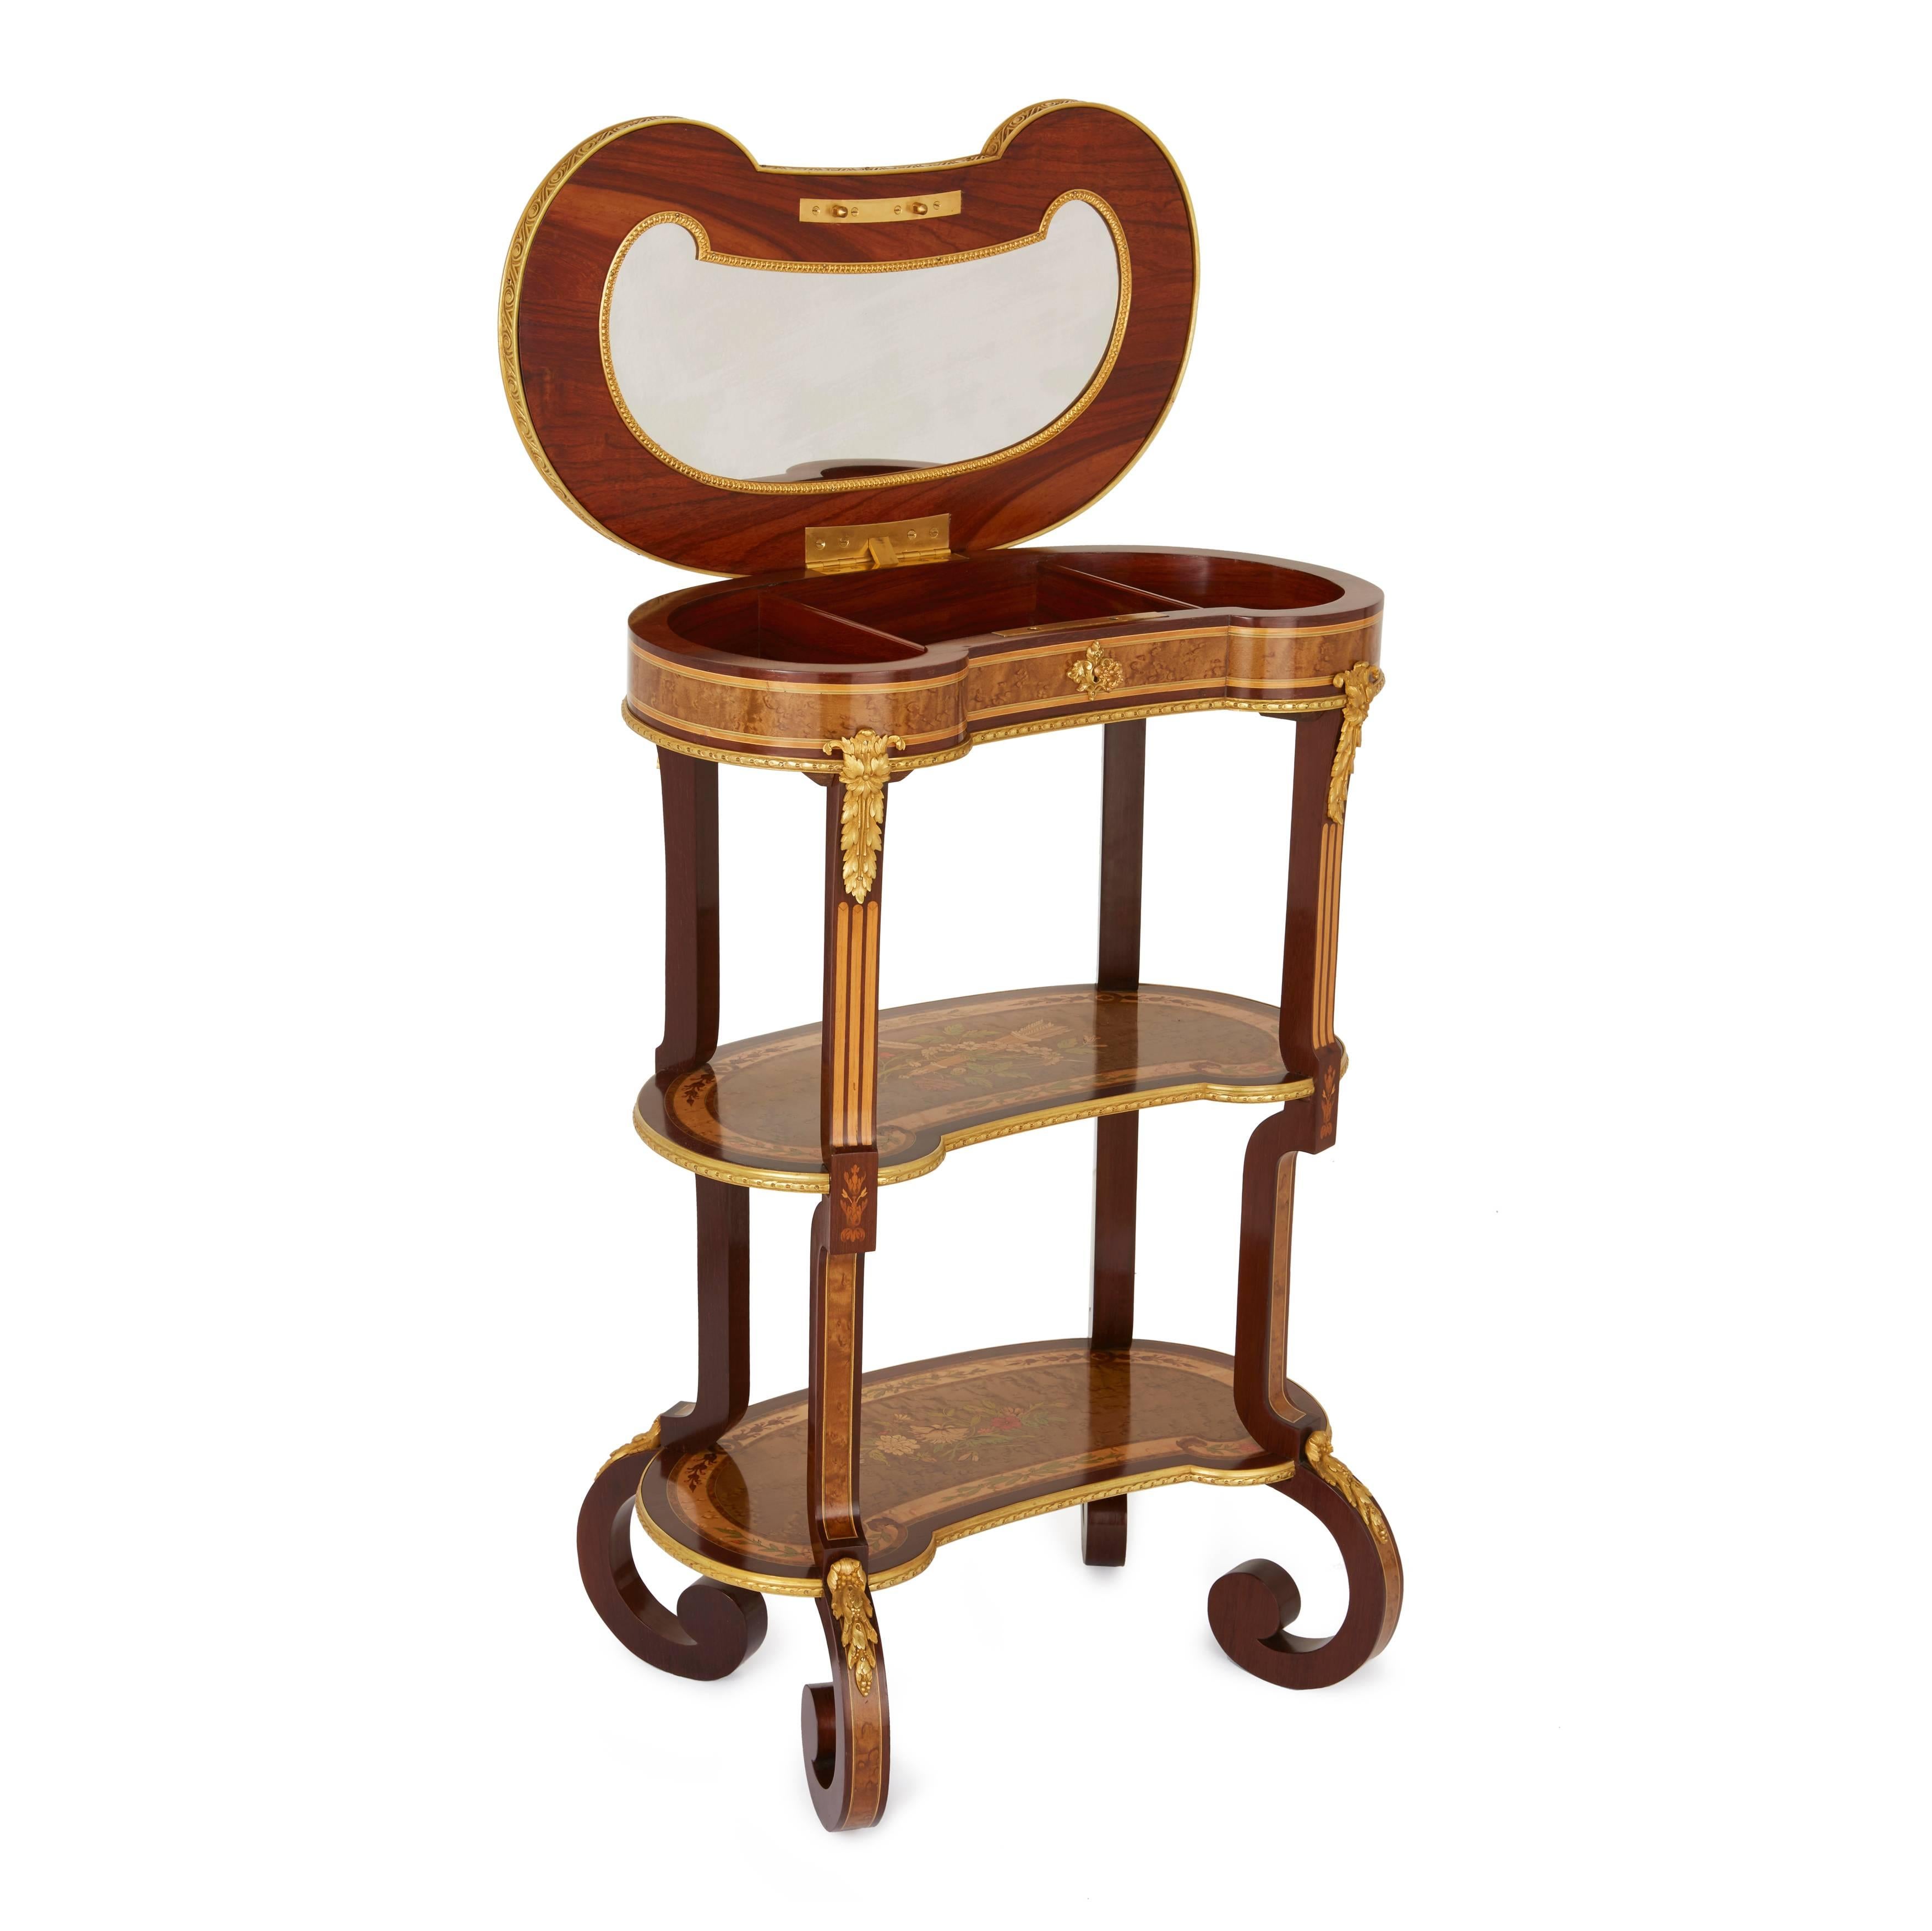 Marquetry Louis XV Style Kidney Shaped Ormolu-Mounted Dressing Table by Sormani